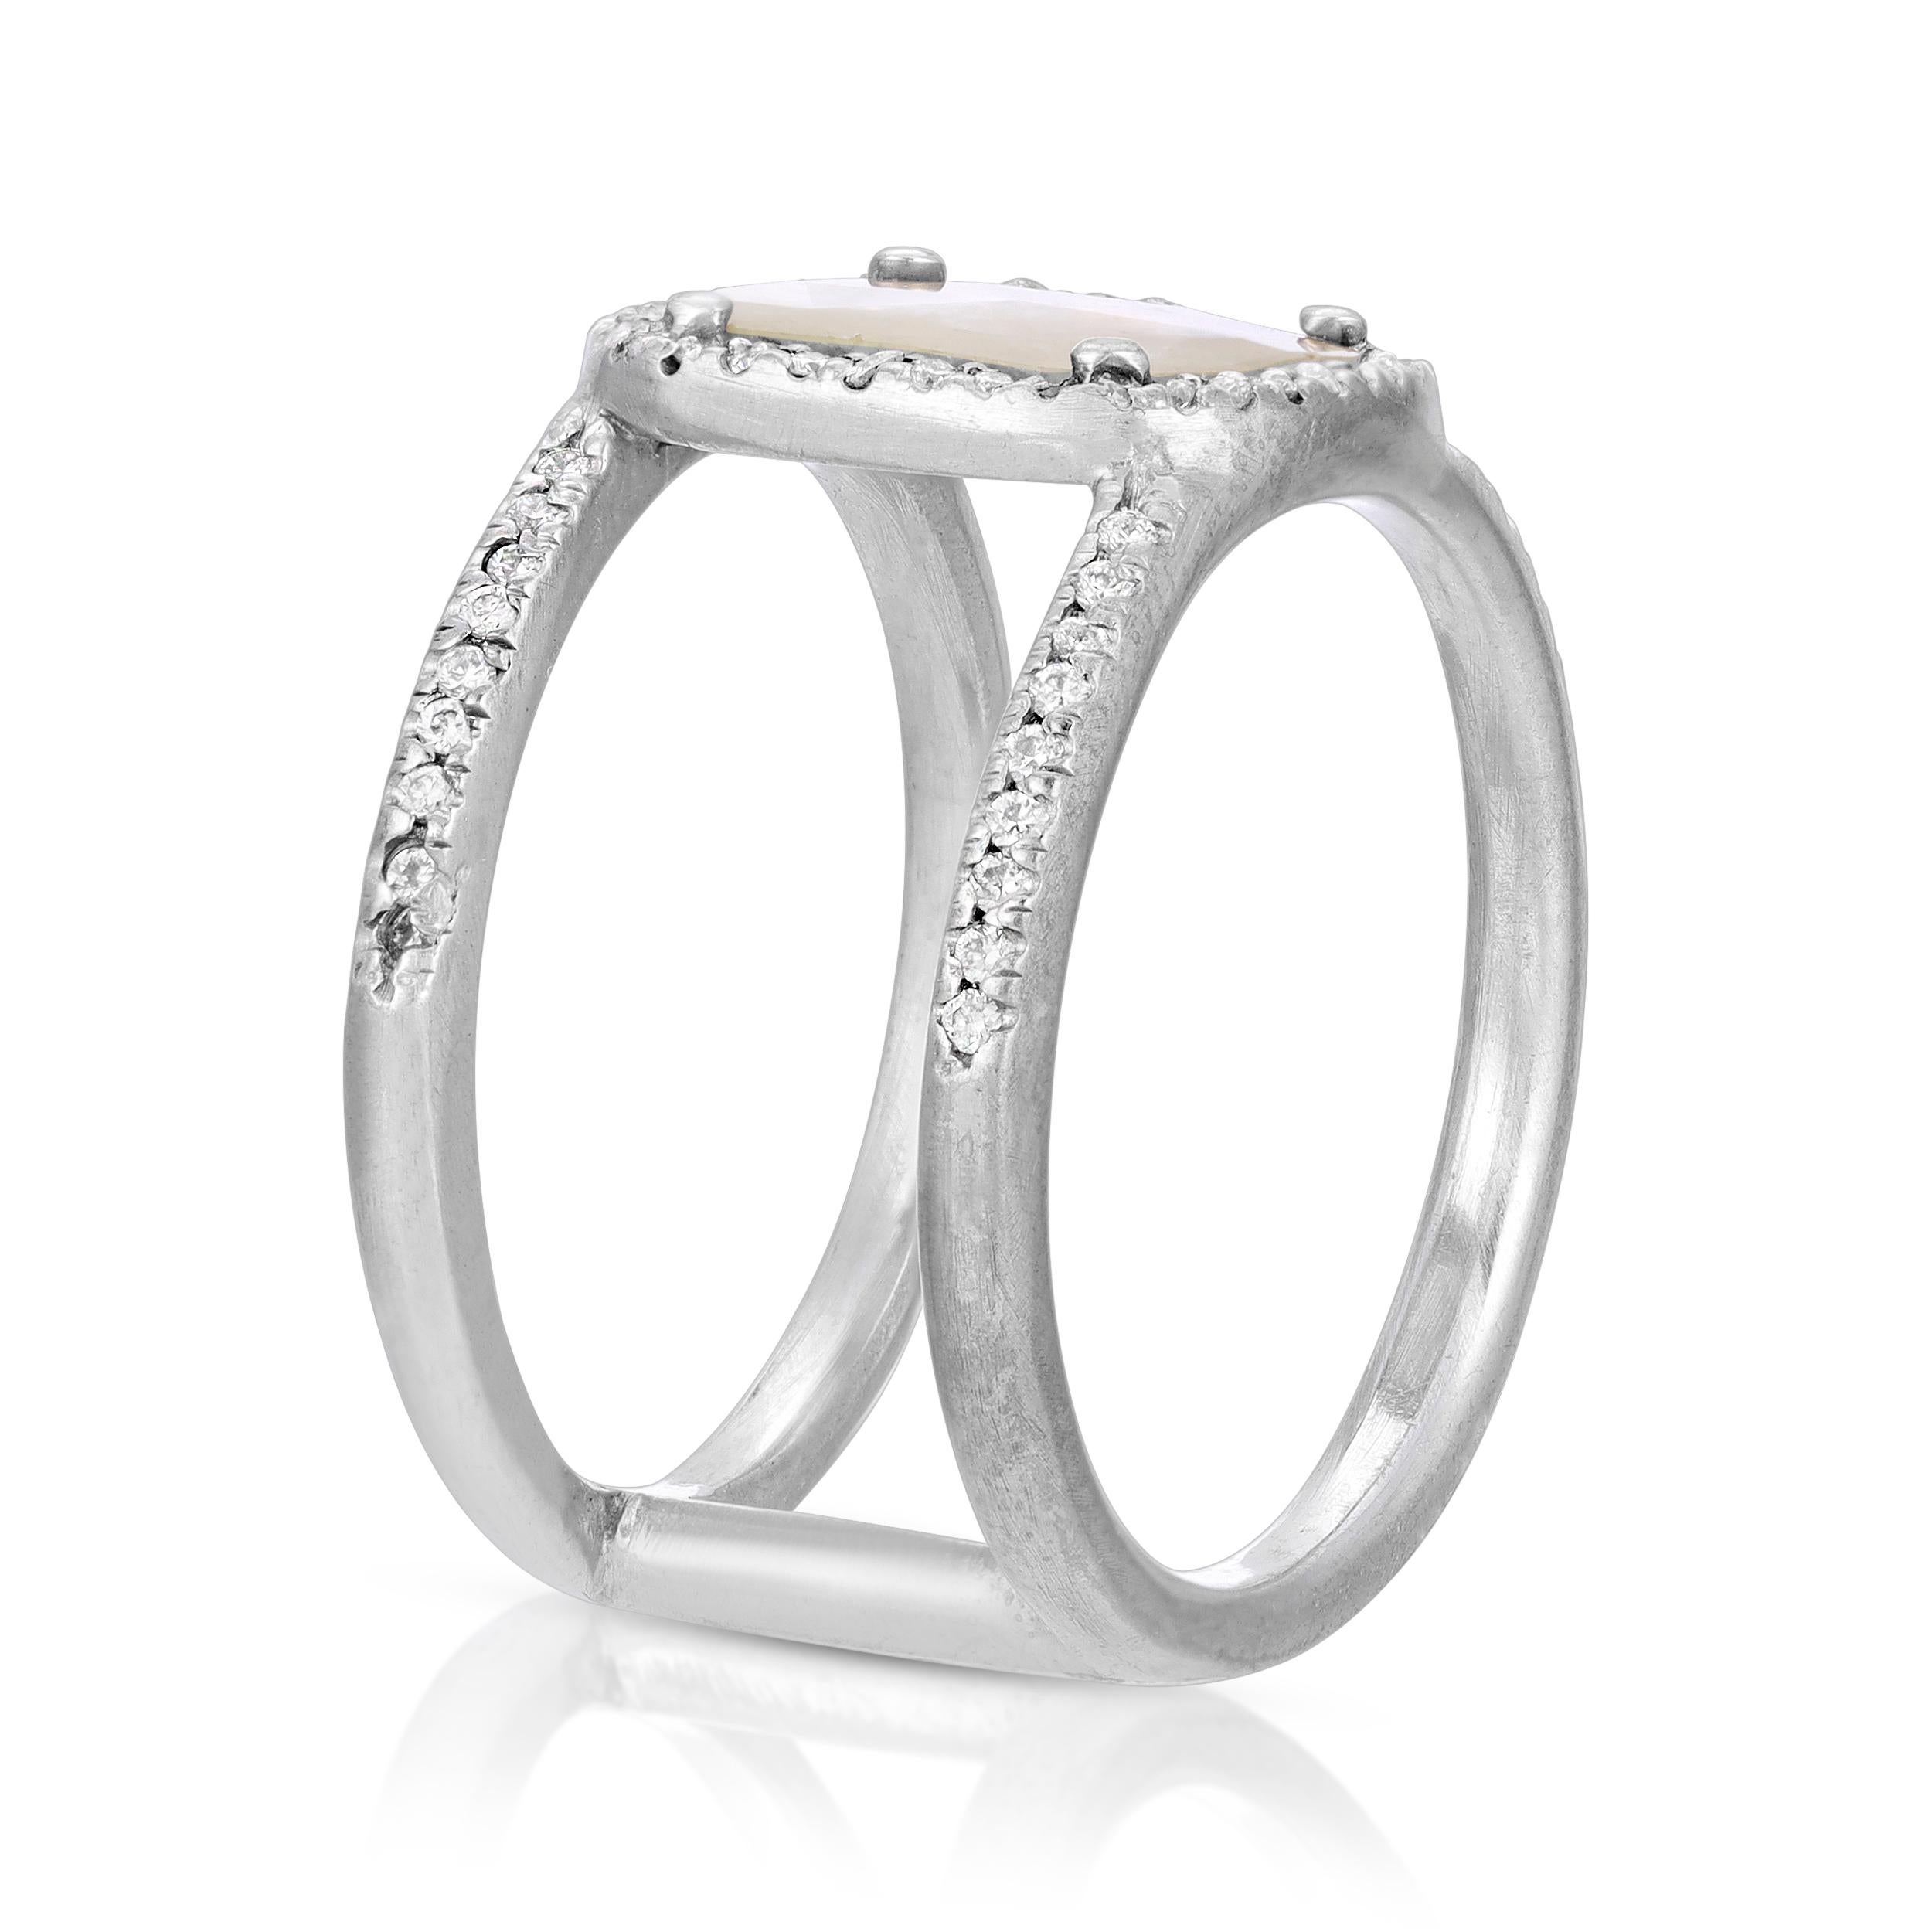 1.96ct Clear and Black Diamond Slice with .51ct vs quality Diamond Pave in 18k White Gold with Diamond Pave Double Bands.  Diamond Pave goes 1.3 around the bands with Diamond Pave stabilizing bar in the back of the ring.  size 6 1/2. All Diamonds